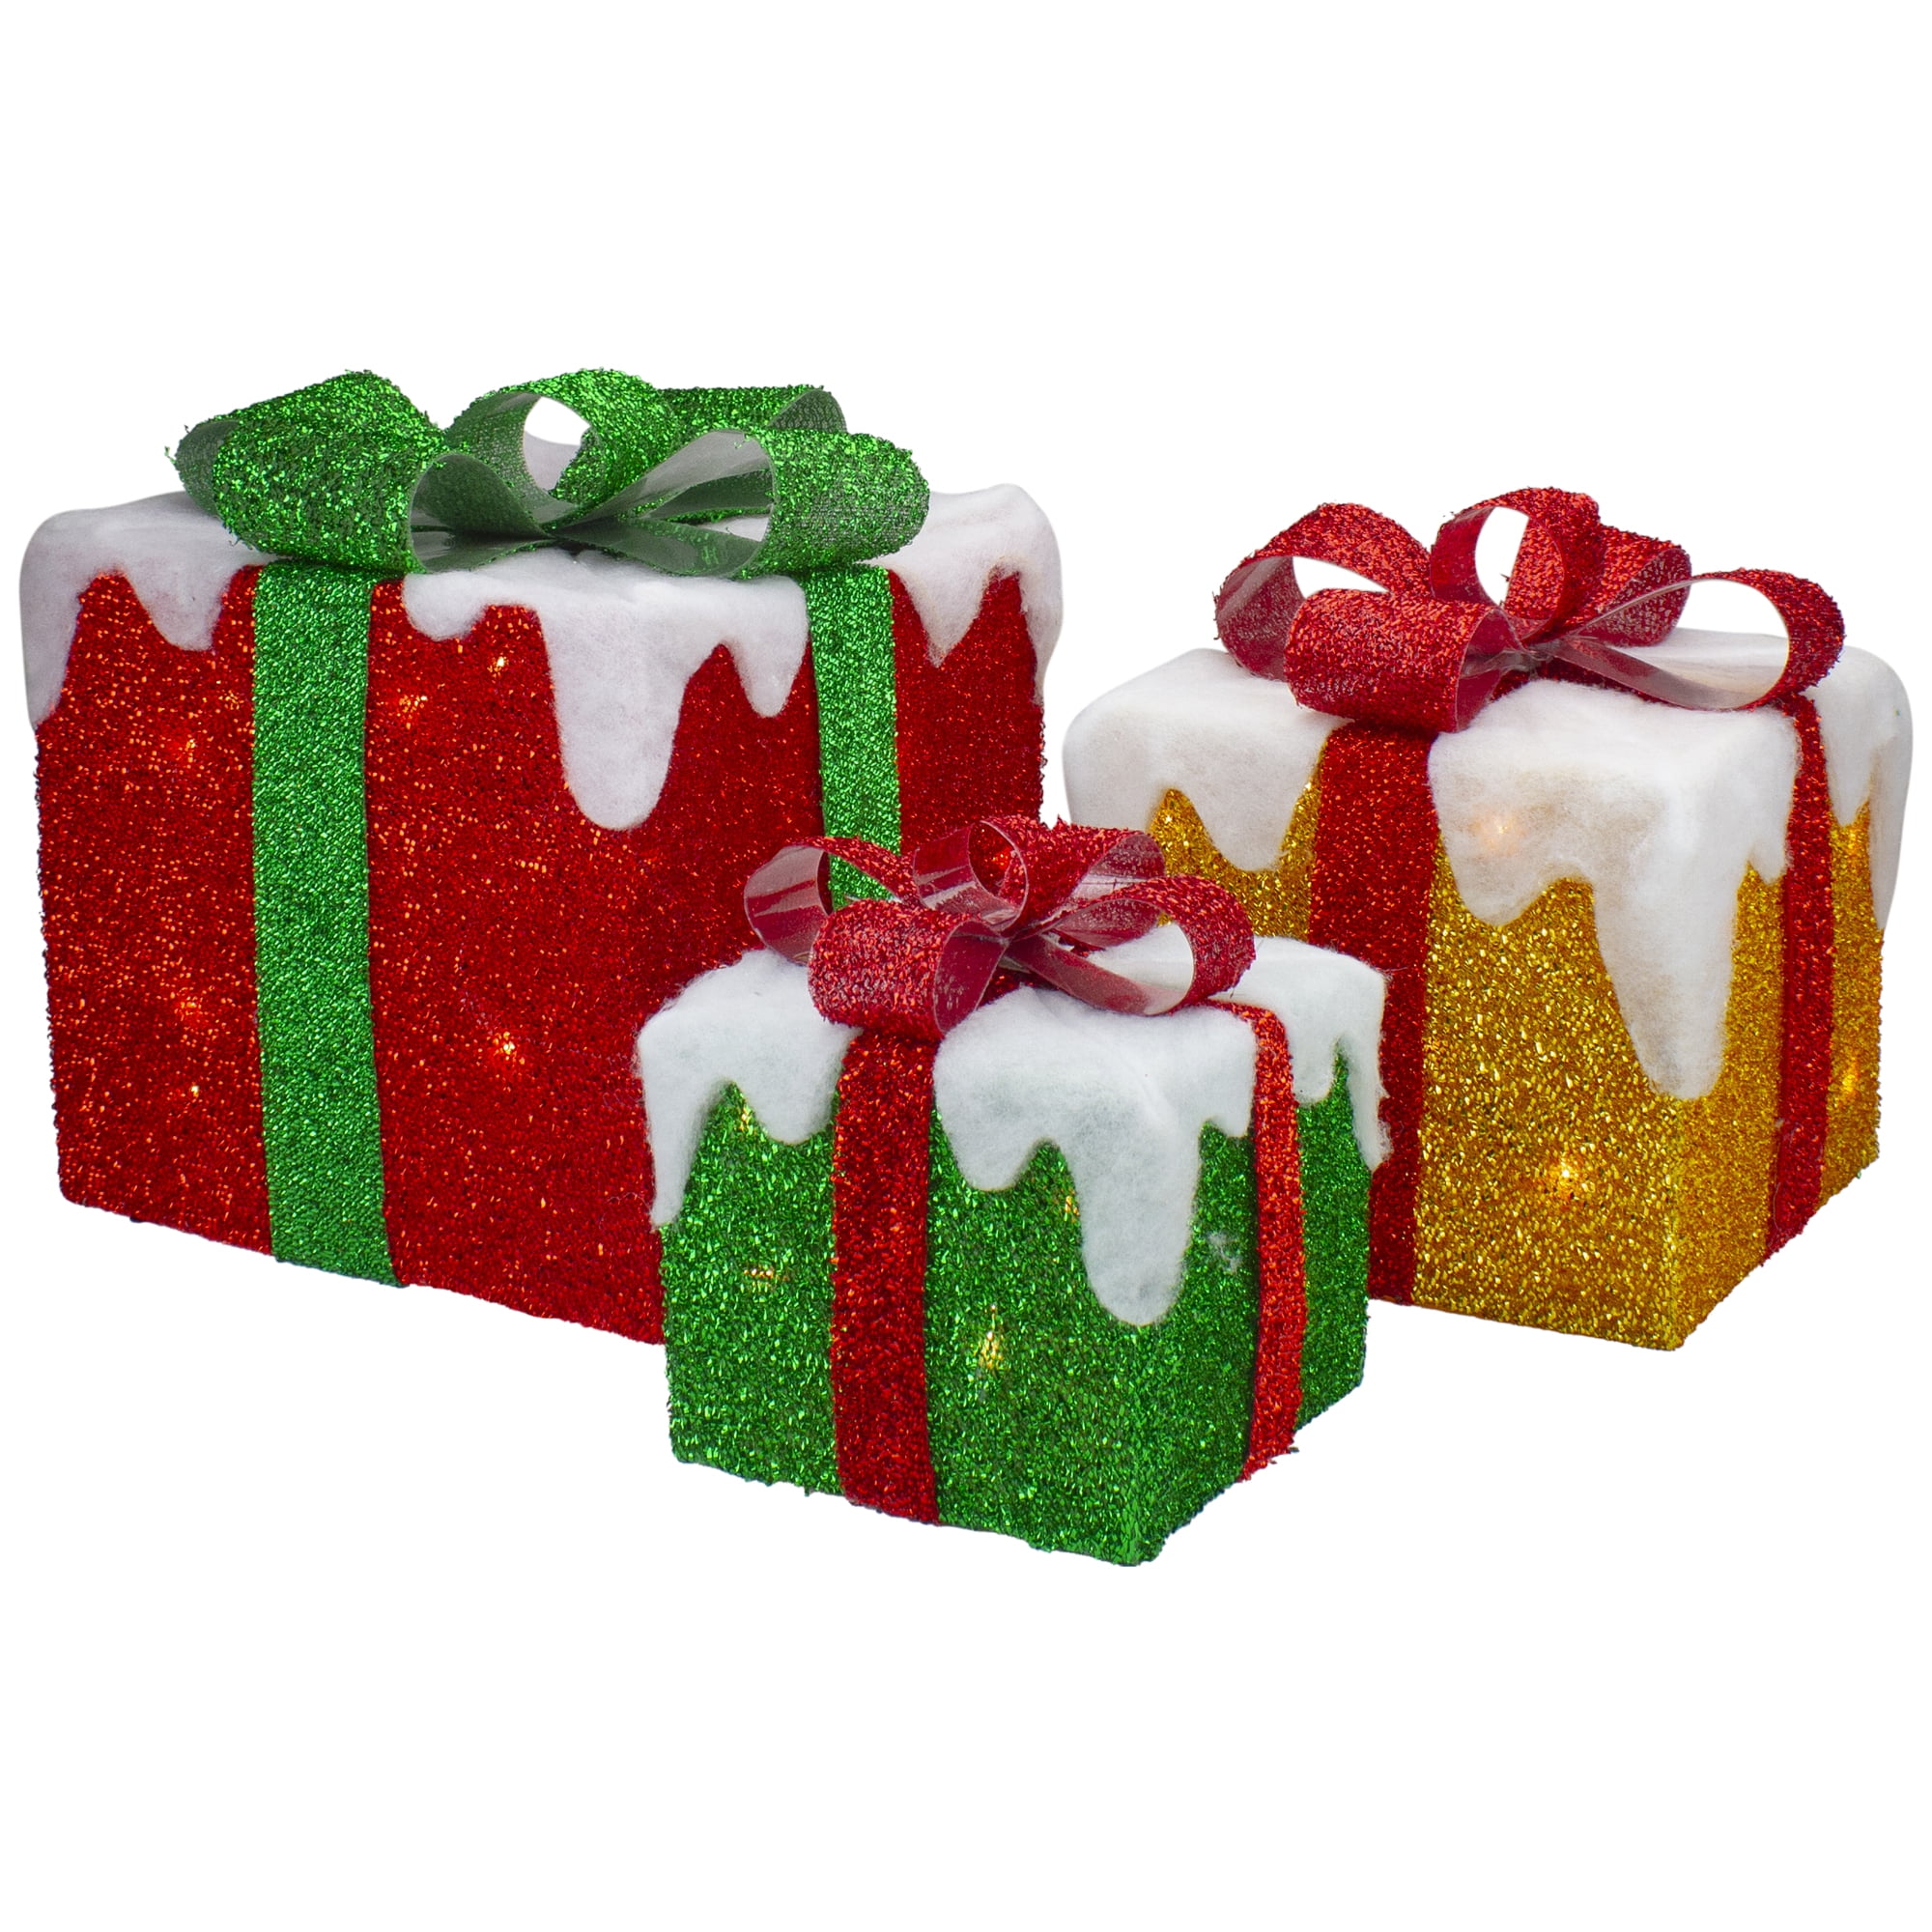 Set of 3 LED Lighted Green, Gold and Red Snowy Gift Boxes Outdoor ...